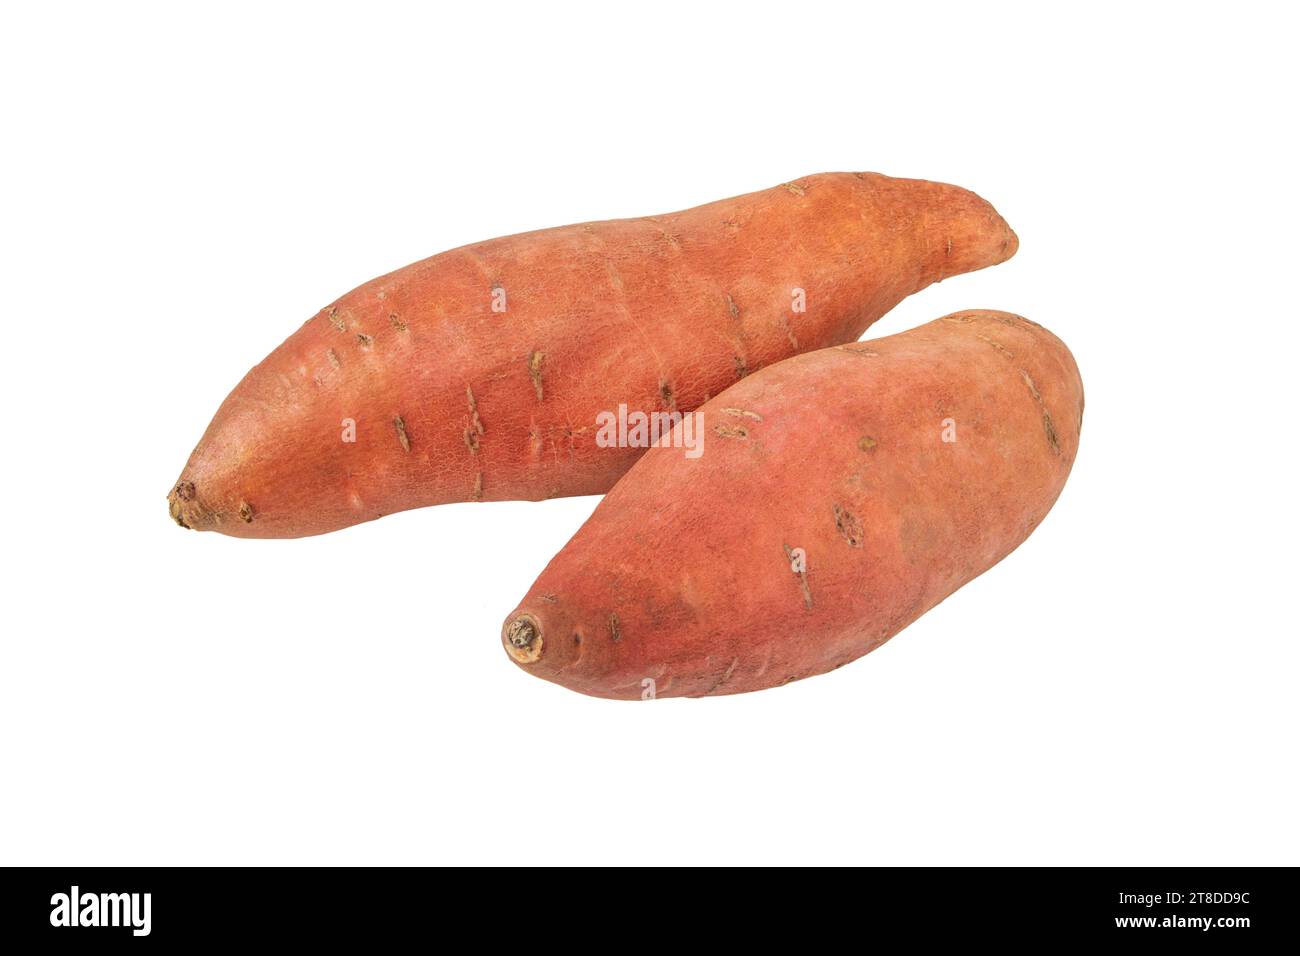 Sweet potato or sweetpotato two whole tubes with red skin isolated on white. Vegetable food staple. Stock Photo